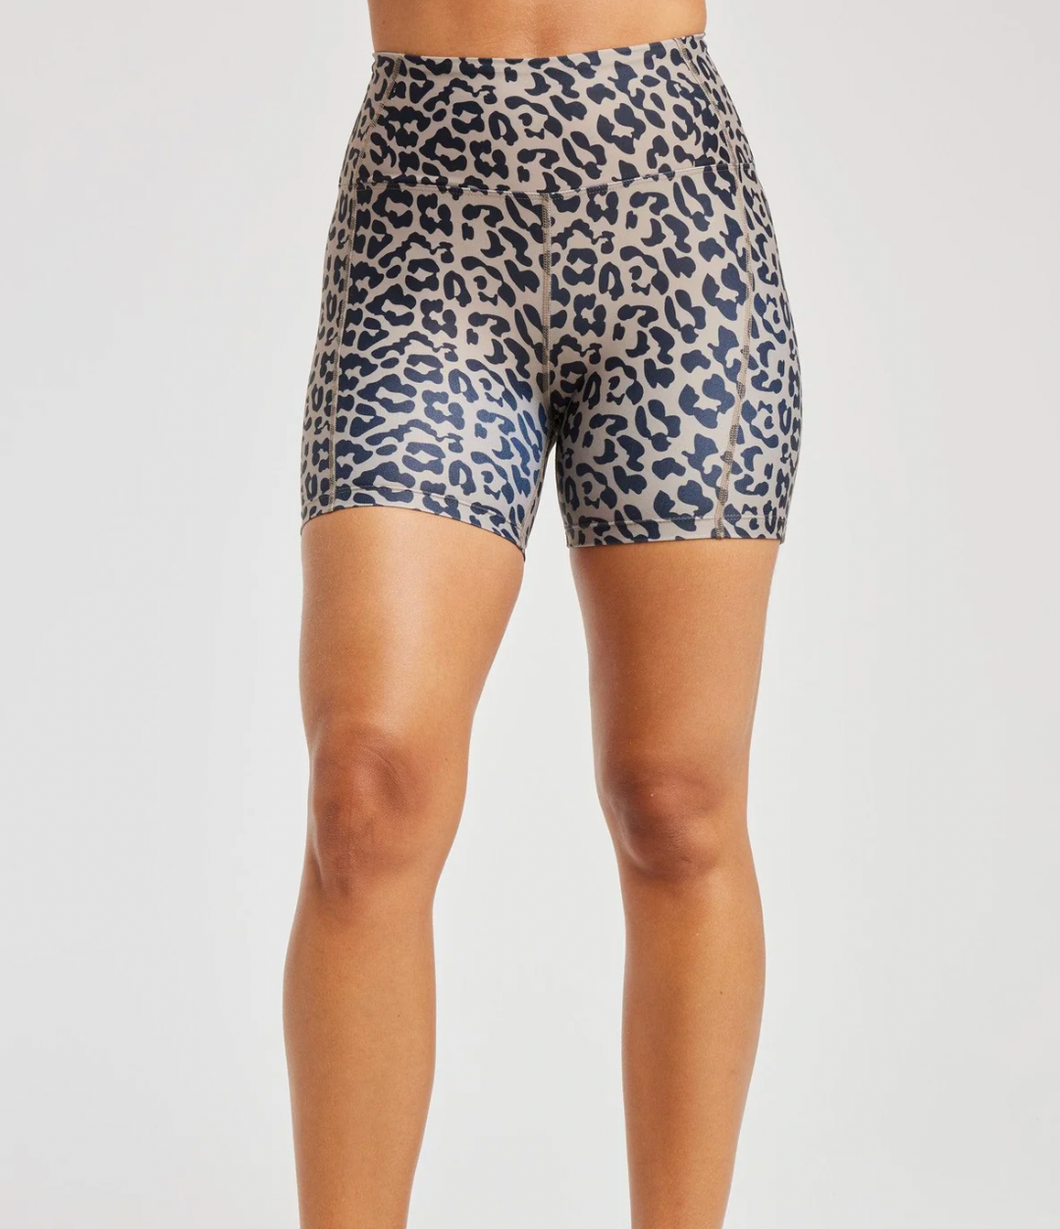 Year of Ours Leopard Short Short